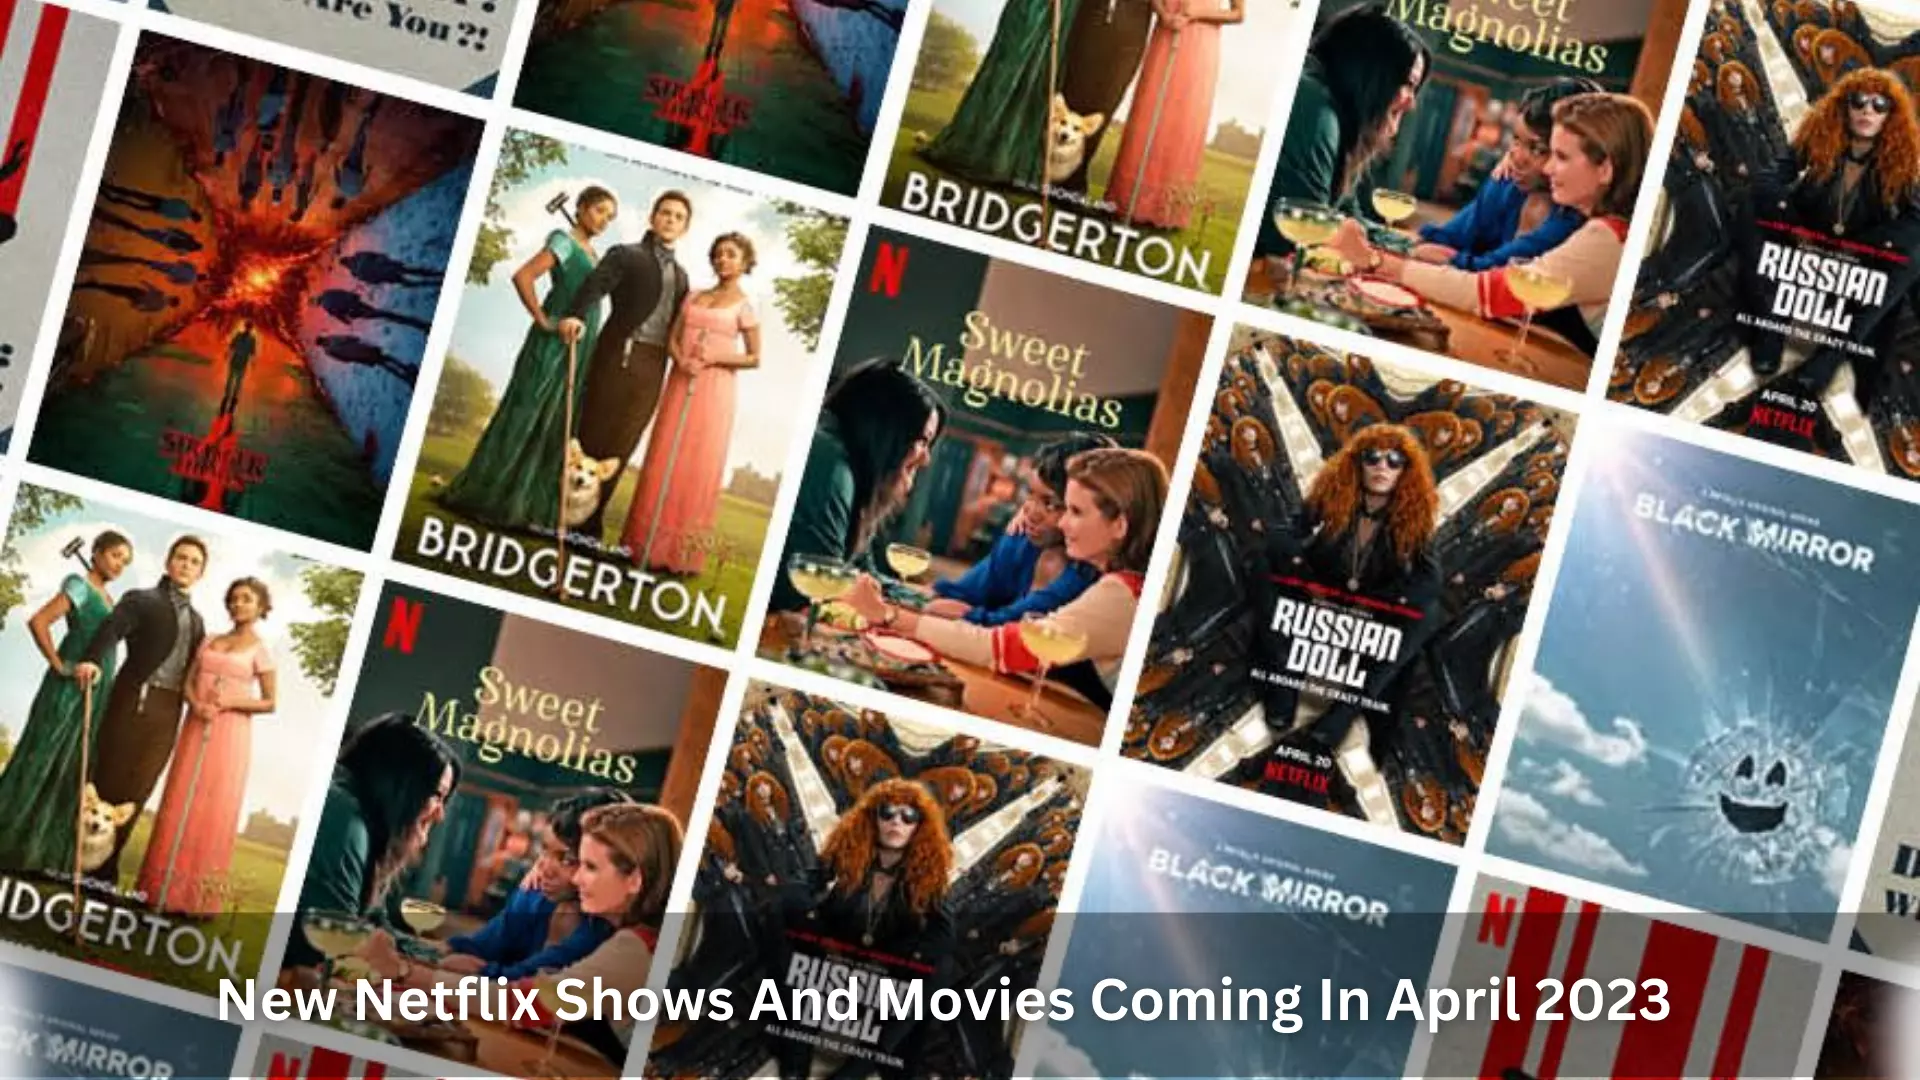 All Of The New Netflix Shows And Movies Coming In April 2023 – Check it out!